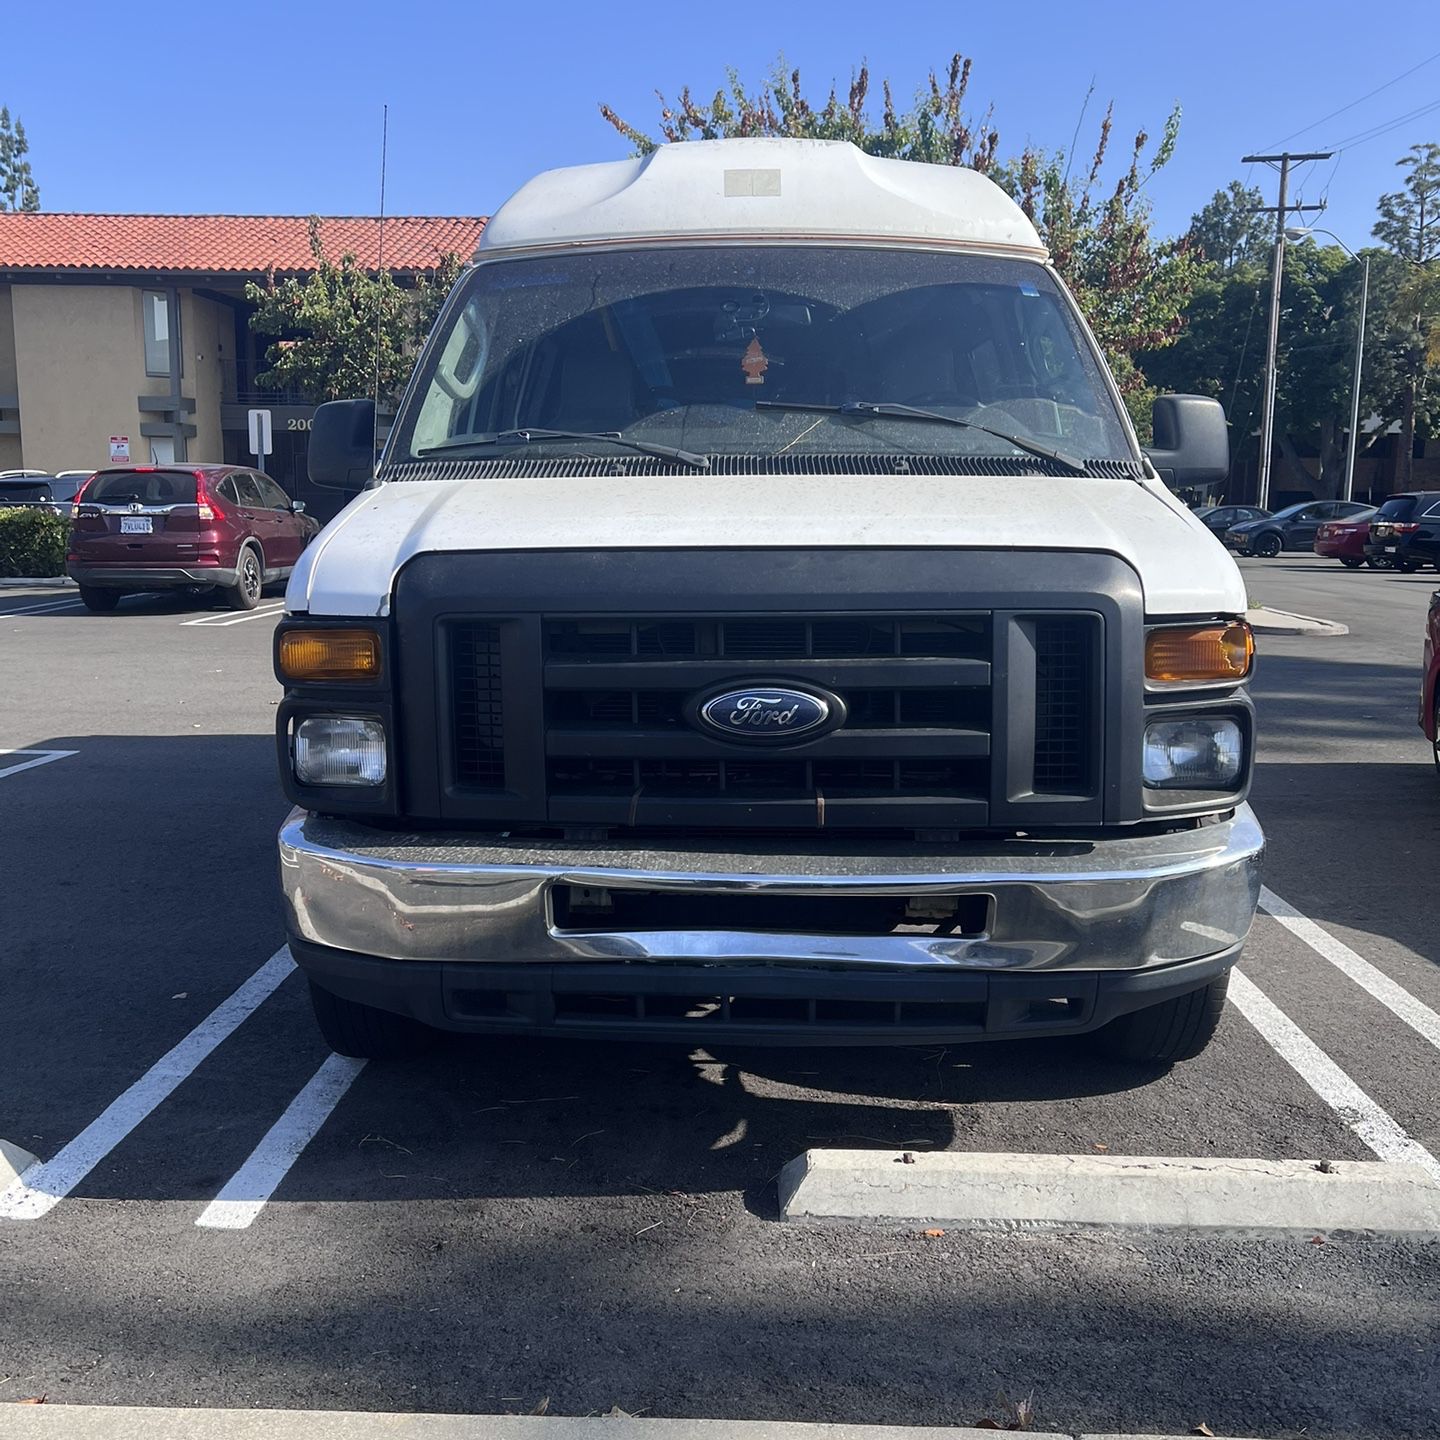 2010 White WC van Ford E-150/salvaged Title 